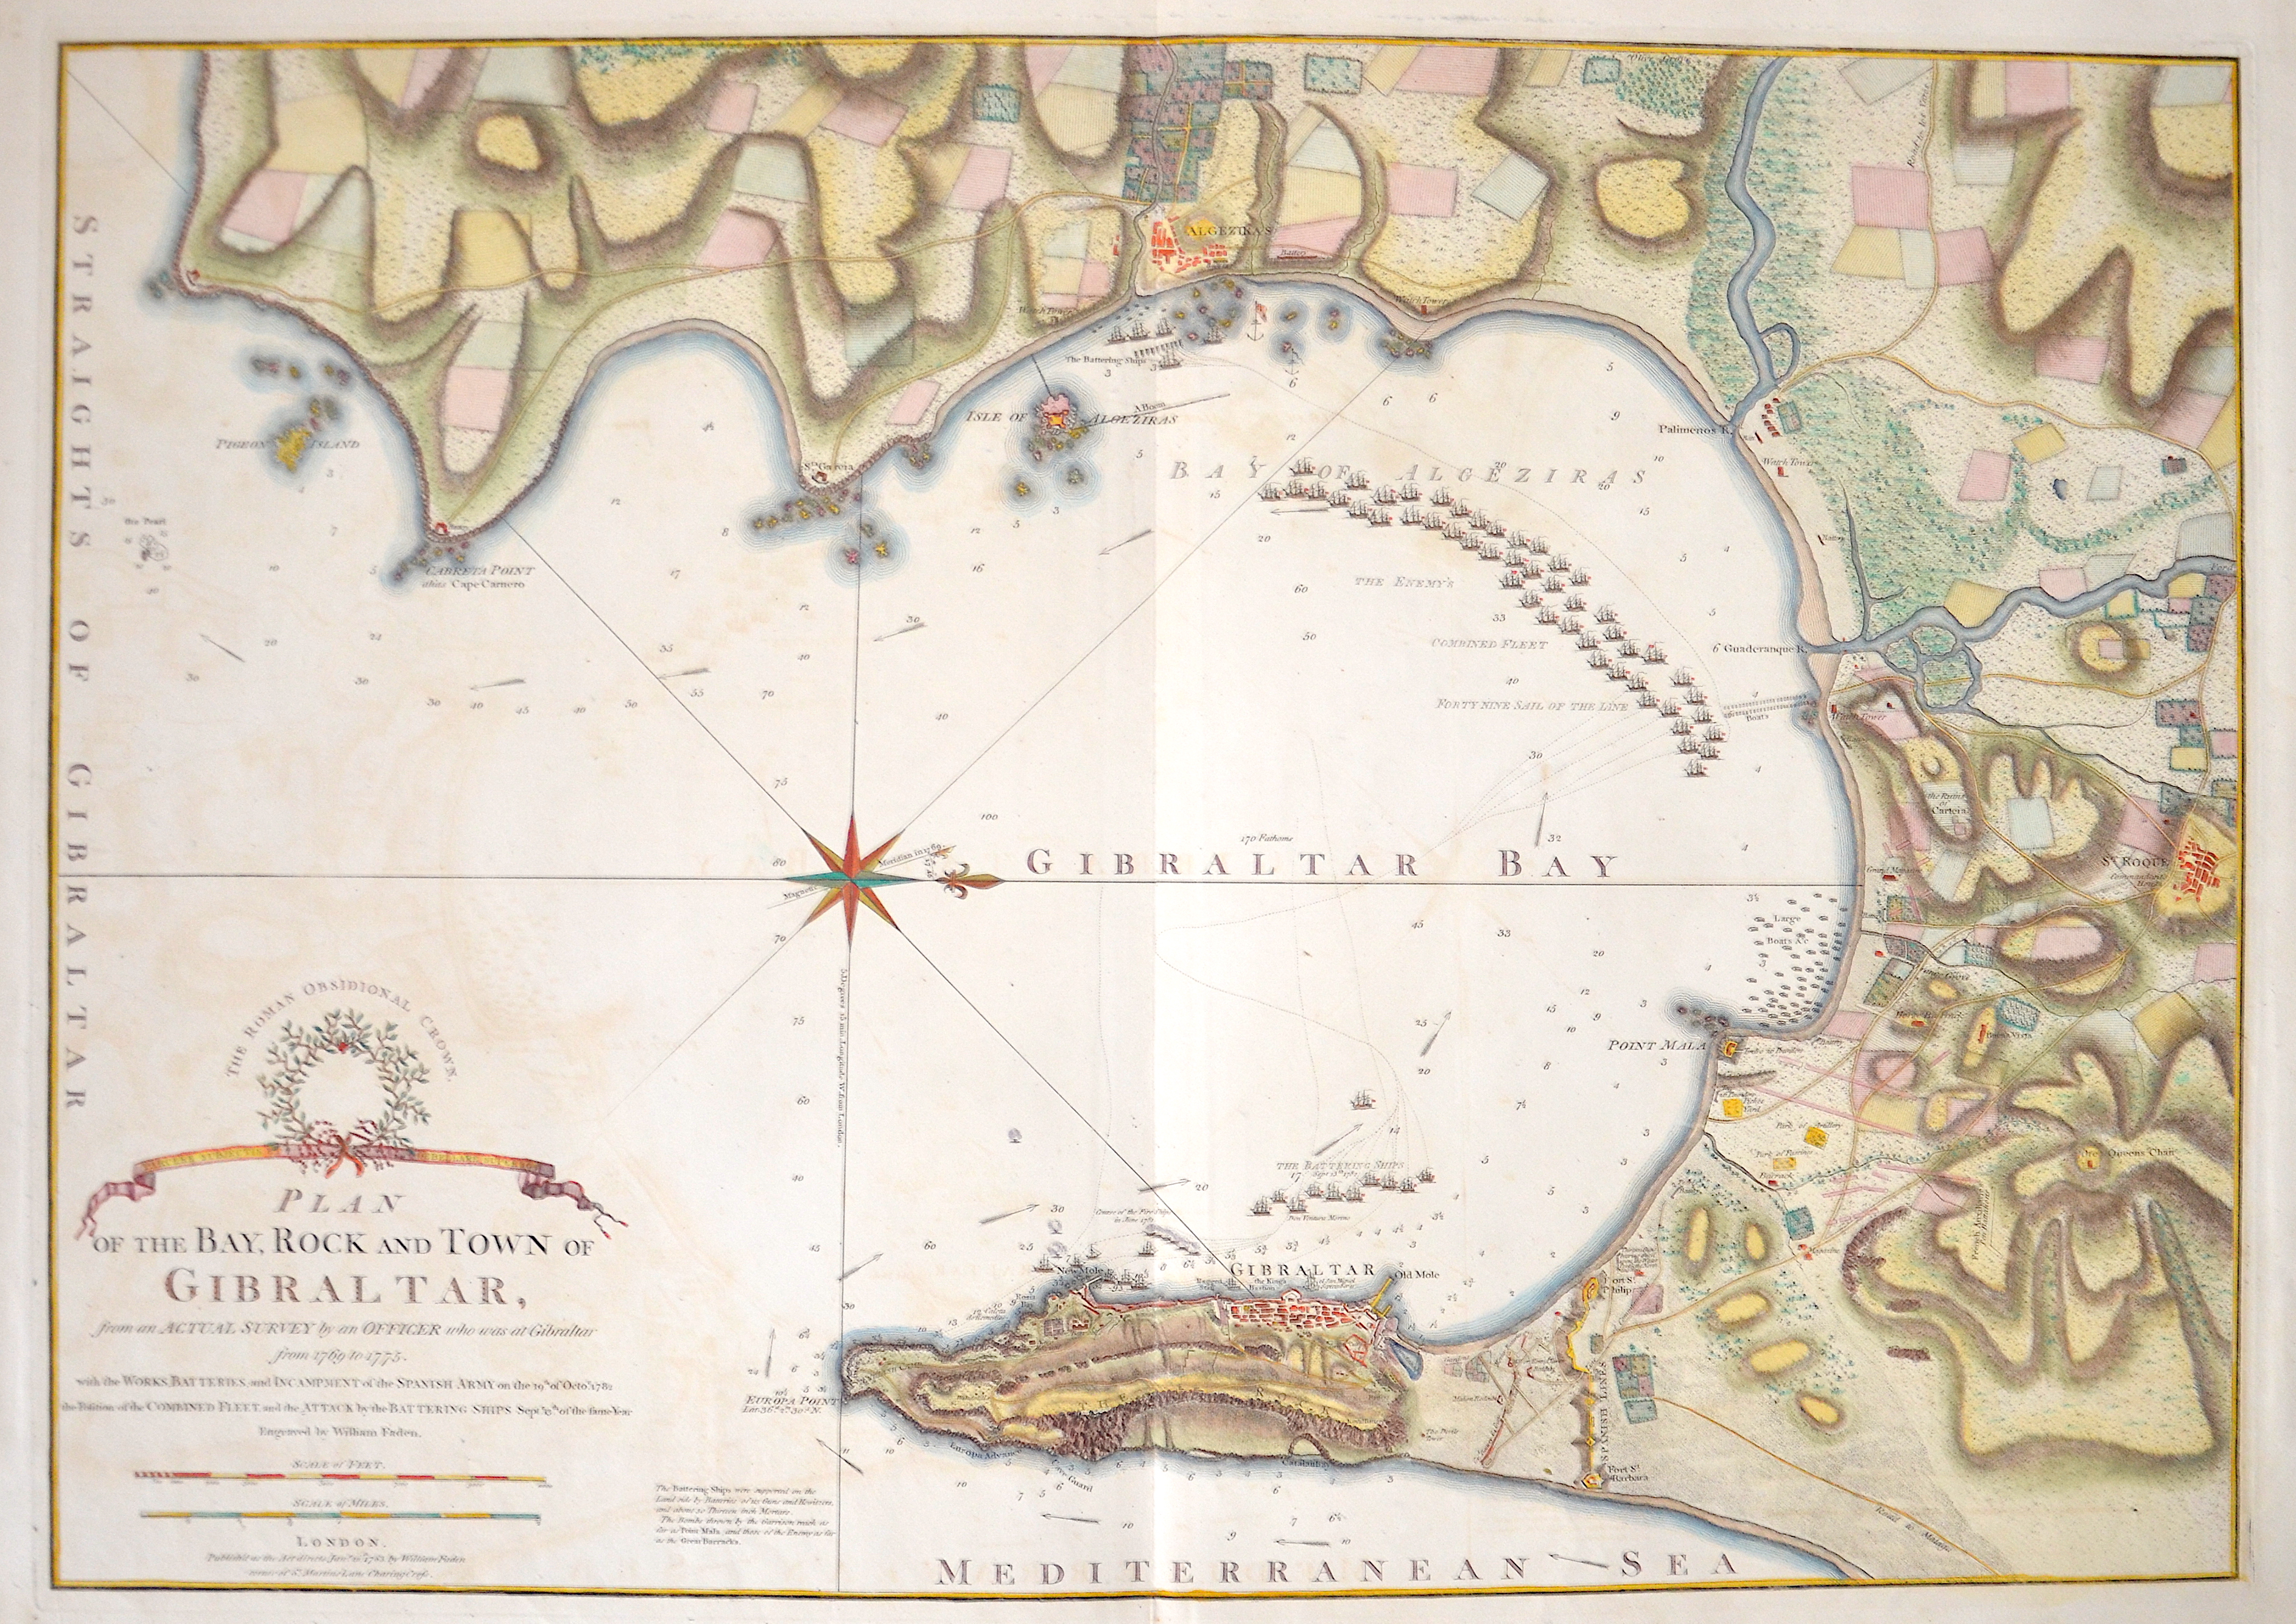 Faden  Plan of the Bay, Rock and Town of Gibraltar, from an Actual Survey by an Officer who was at Gibraltar from 1769 to 1775.